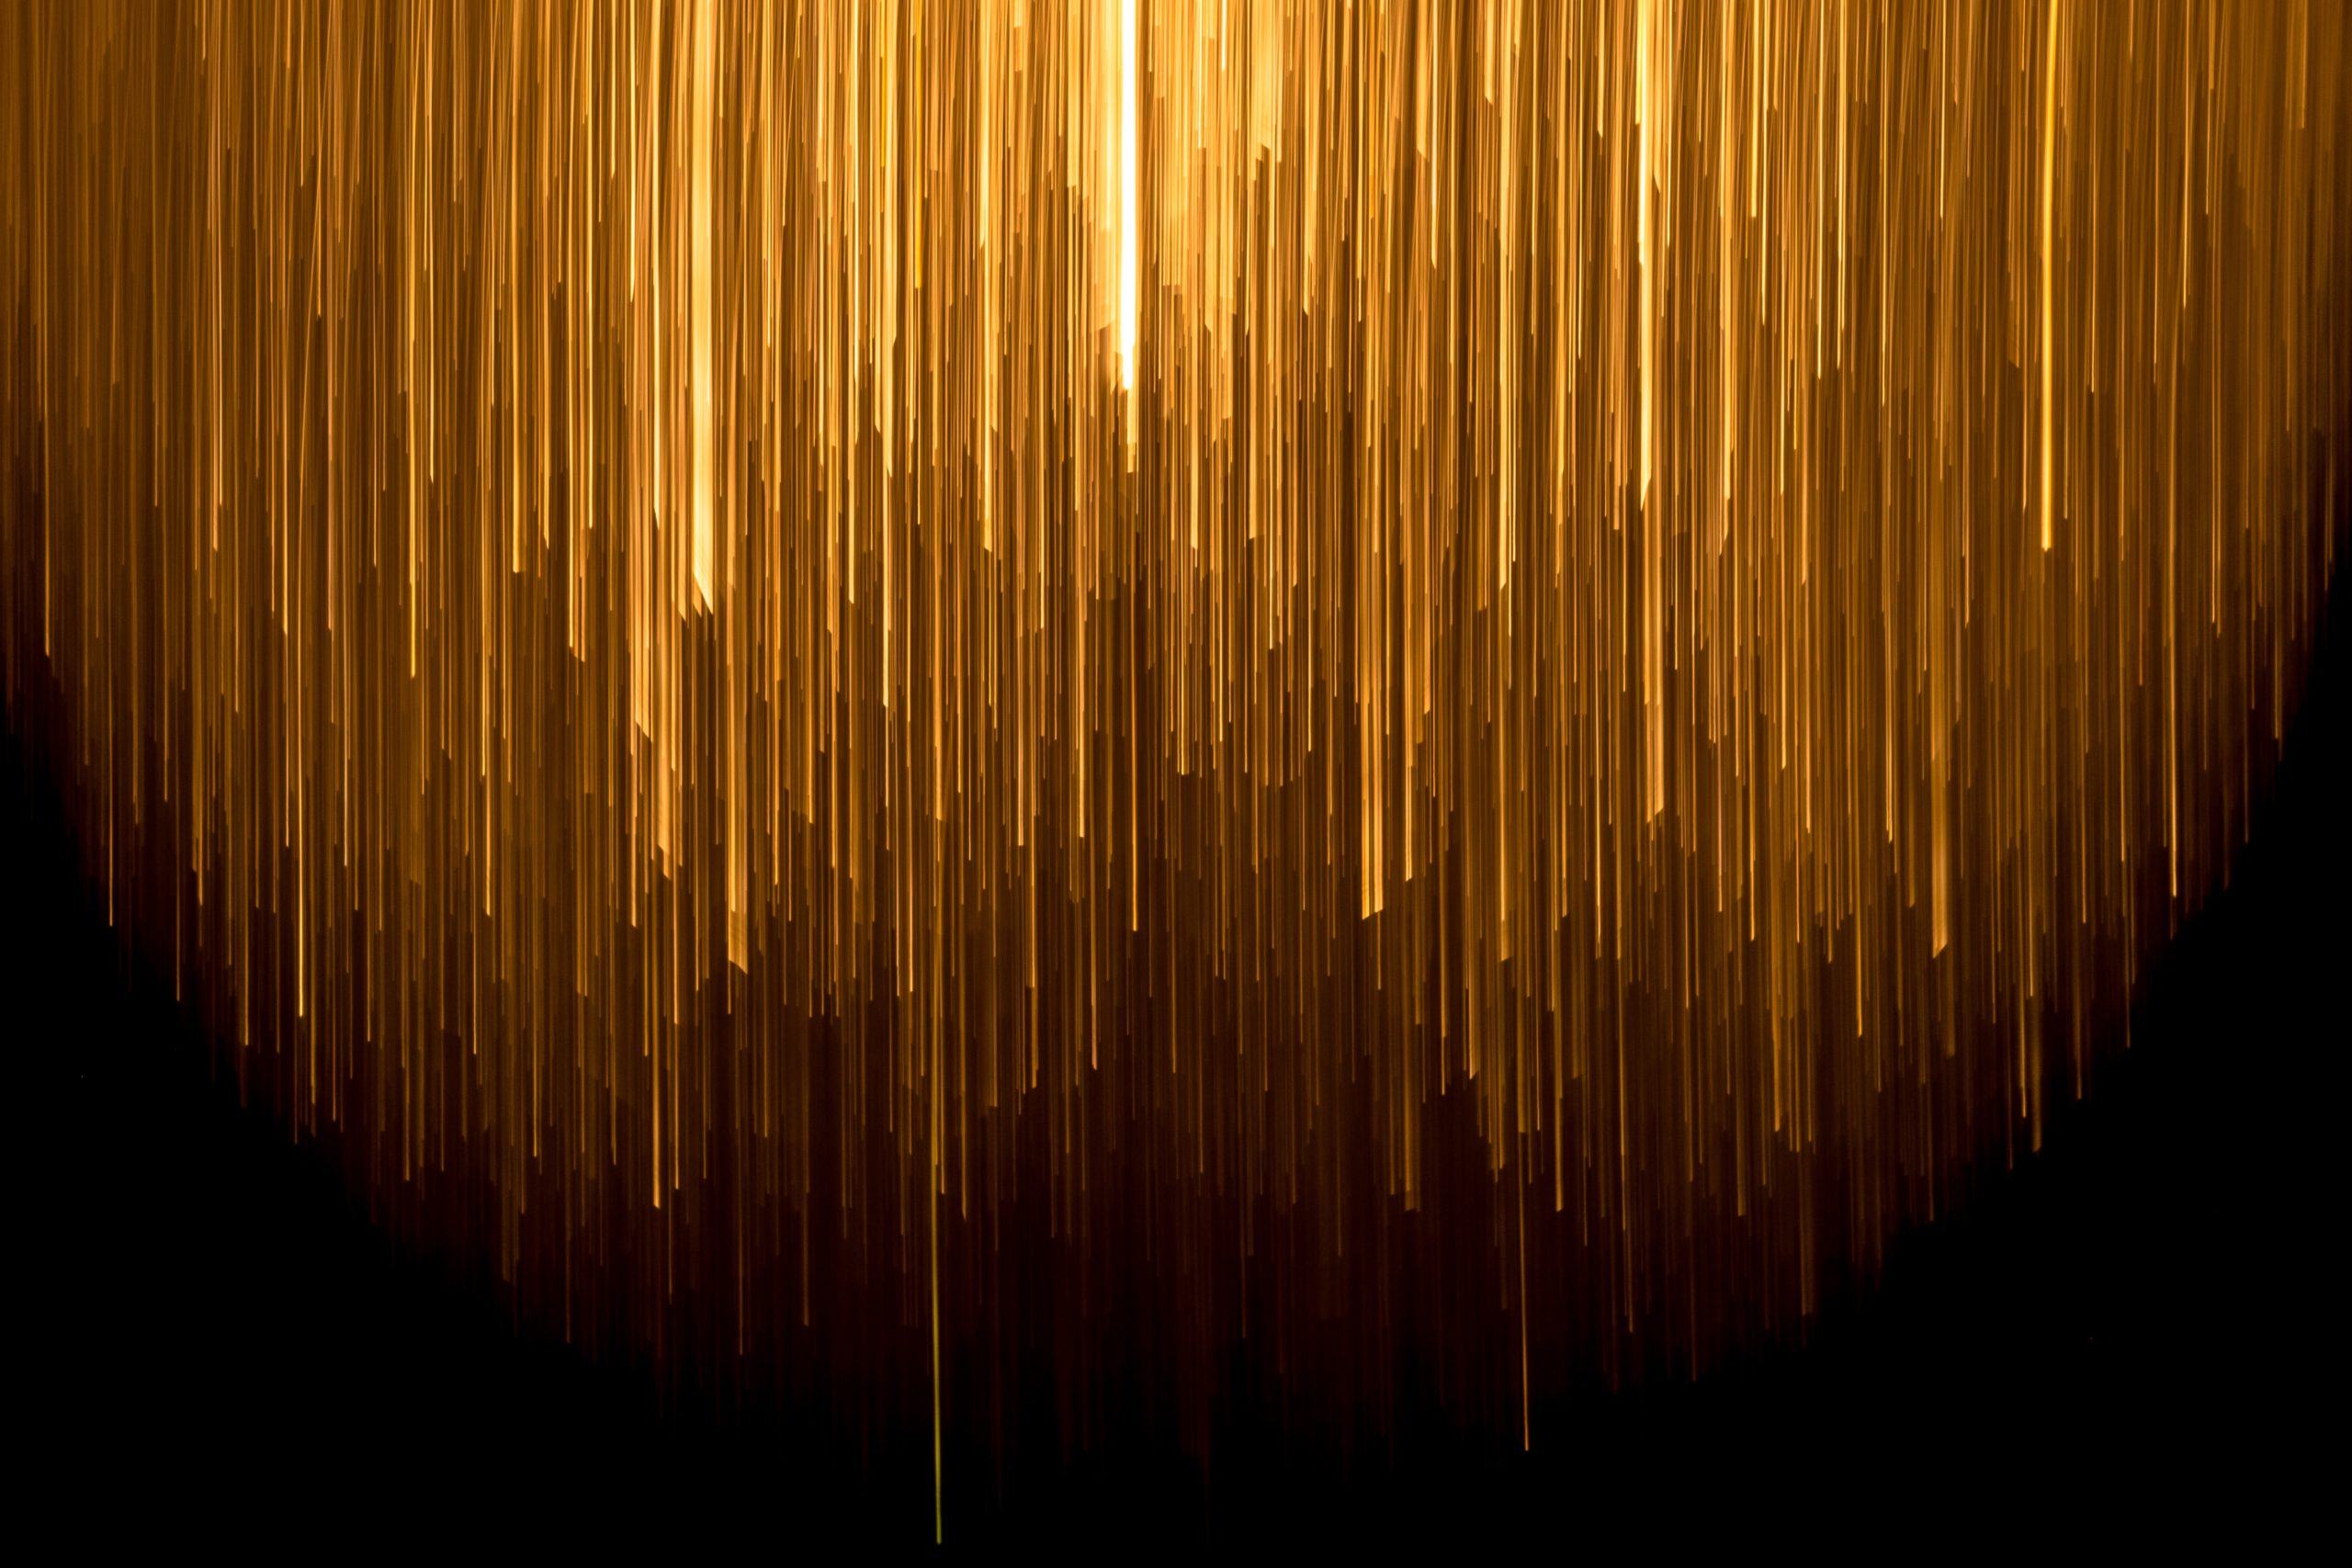 an abstract image - gold lines shooting down on a black background